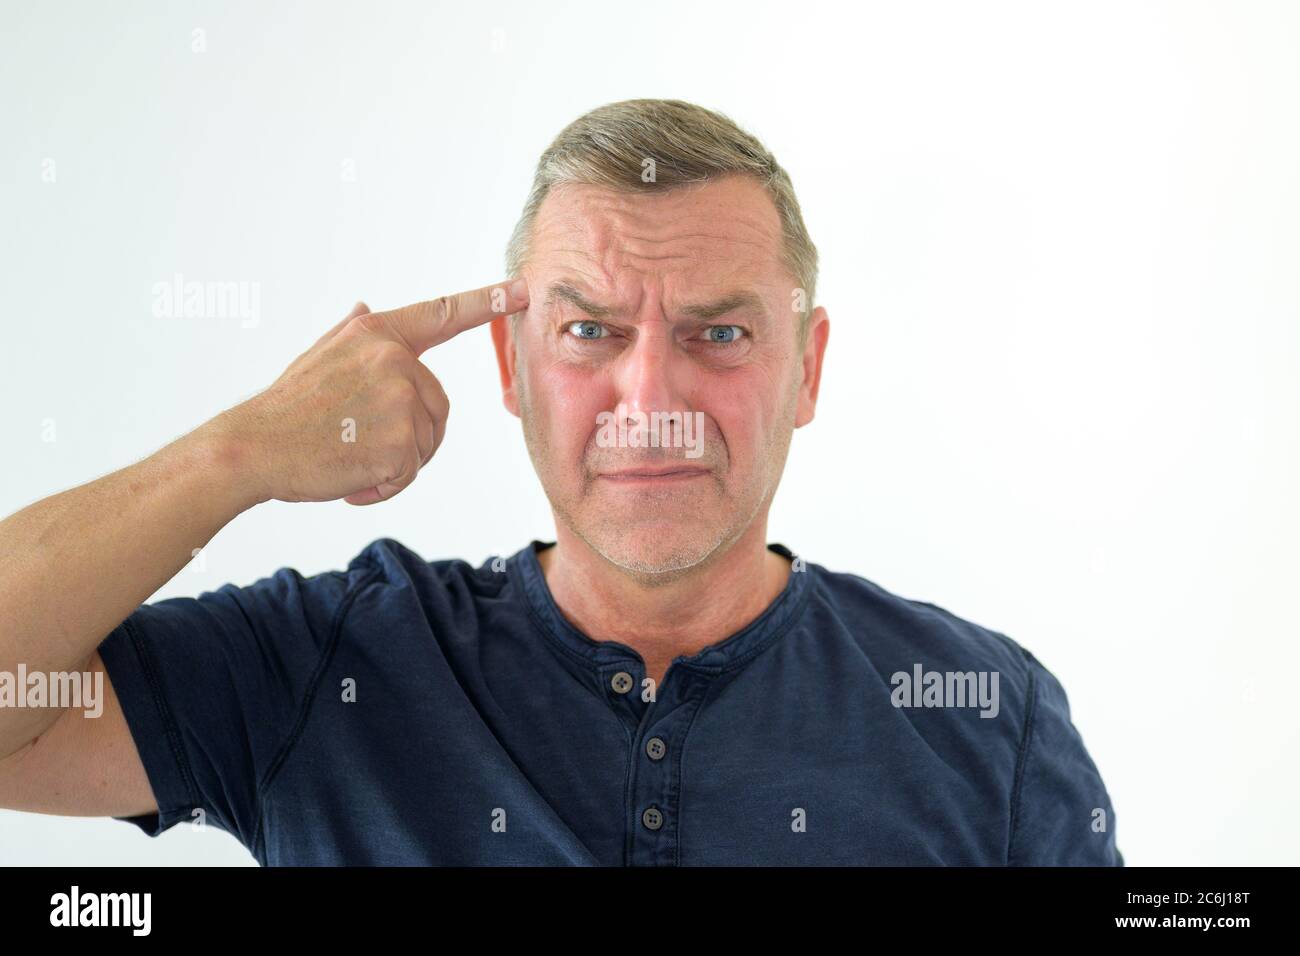 Angry man making a threatening gun gesture with his hand pointing at his own forehead Stock Photo